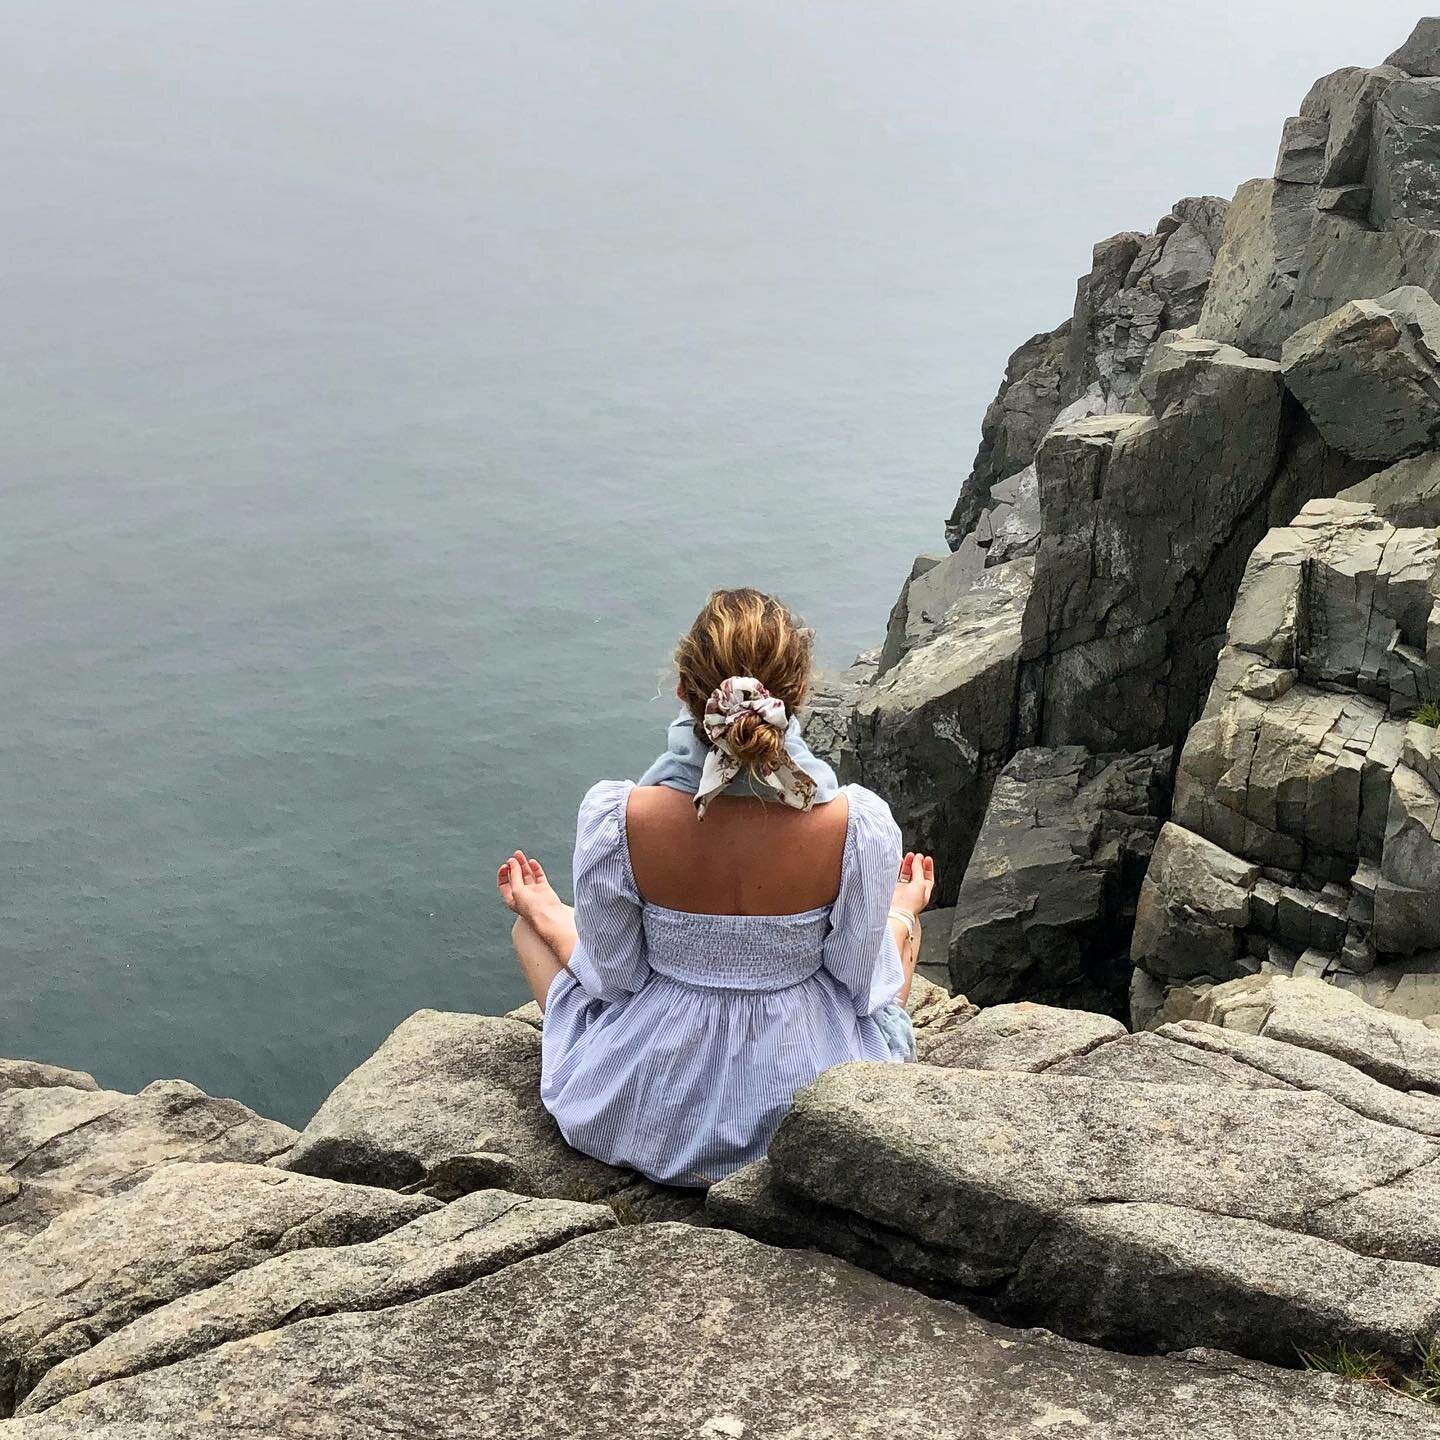 Maine is om-mazing&mdash;especially Downeast 🧘&zwj;♀️🕉💫

This is the magical place that inspired my surrealist @journal_des_reves story, in which I unexpectedly traverse the Silk Road while meditating atop a craggy sea cliff in Maine. Order your c